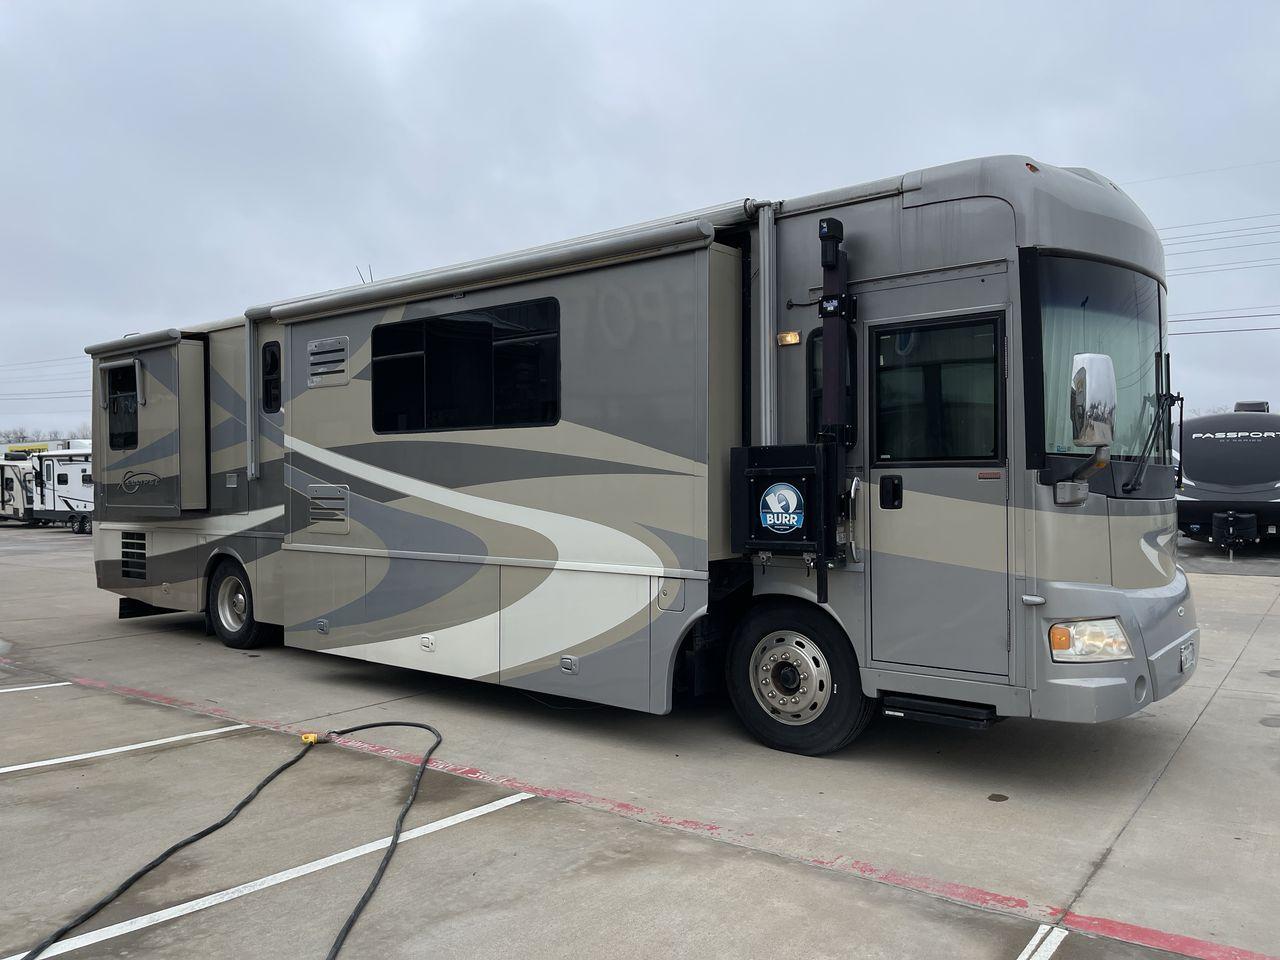 2006 BLUE ITASCA ELLIPSE 40FD - (4UZACKDC56C) , Length: 39 ft | Dry Weight: 32000 lbs | Gross Weight: 42000 lbs transmission, located at 4319 N Main St, Cleburne, TX, 76033, (817) 678-5133, 32.385960, -97.391212 - Here are additional factors highlighting why owning this RV is a superb choice. (1) The 2006 Itasca Ellipse 40FD is 40 feet 5 inches in length, providing ample space for comfortable living and entertaining. (2) It has Fiberglass exterior with vacuum-bonded construction for durability and weather - Photo #27